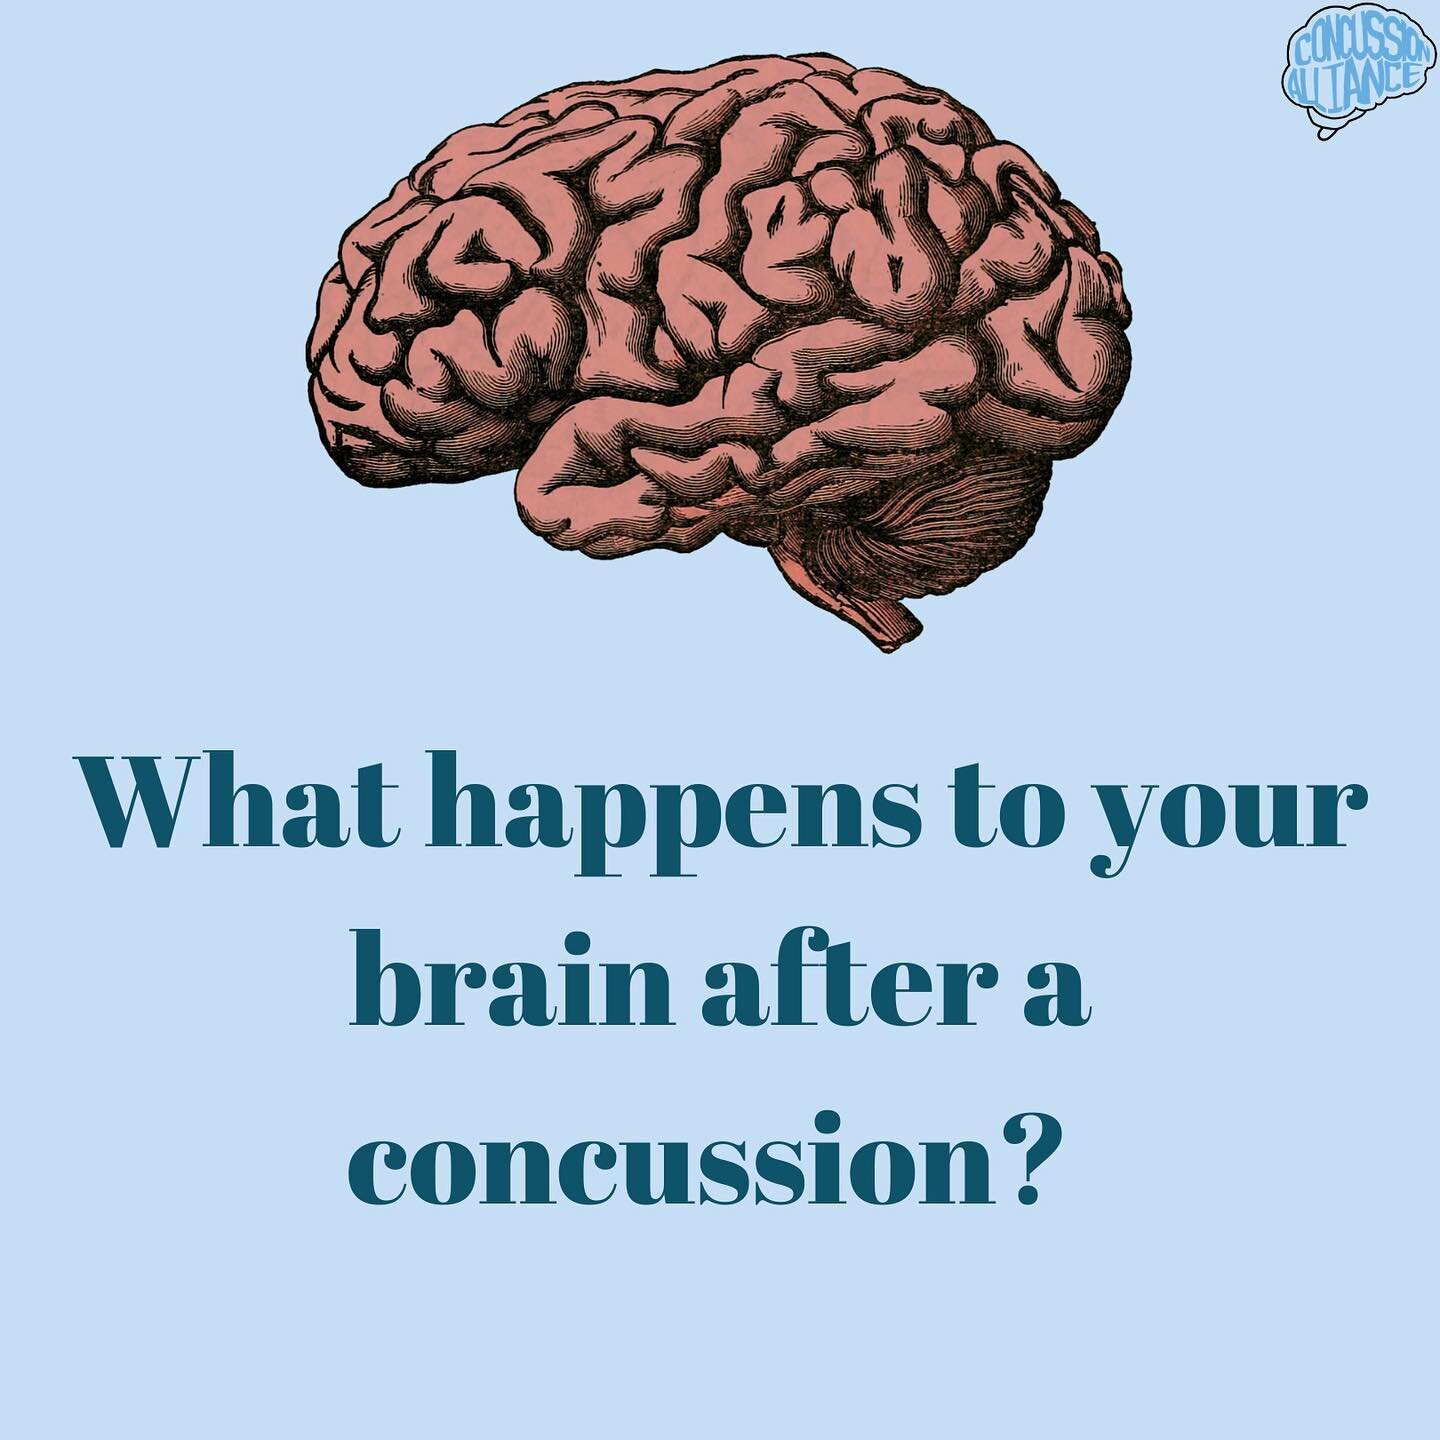 Helpful info about what a concussion is, what causes a concussion, and what happens to your brain after you get a concussion. Link in bio. @elenamoralesgrahl @car0line.saksena .
.
.
.

#concussion #concussions
#concussionssuck #concussionrehab #concu